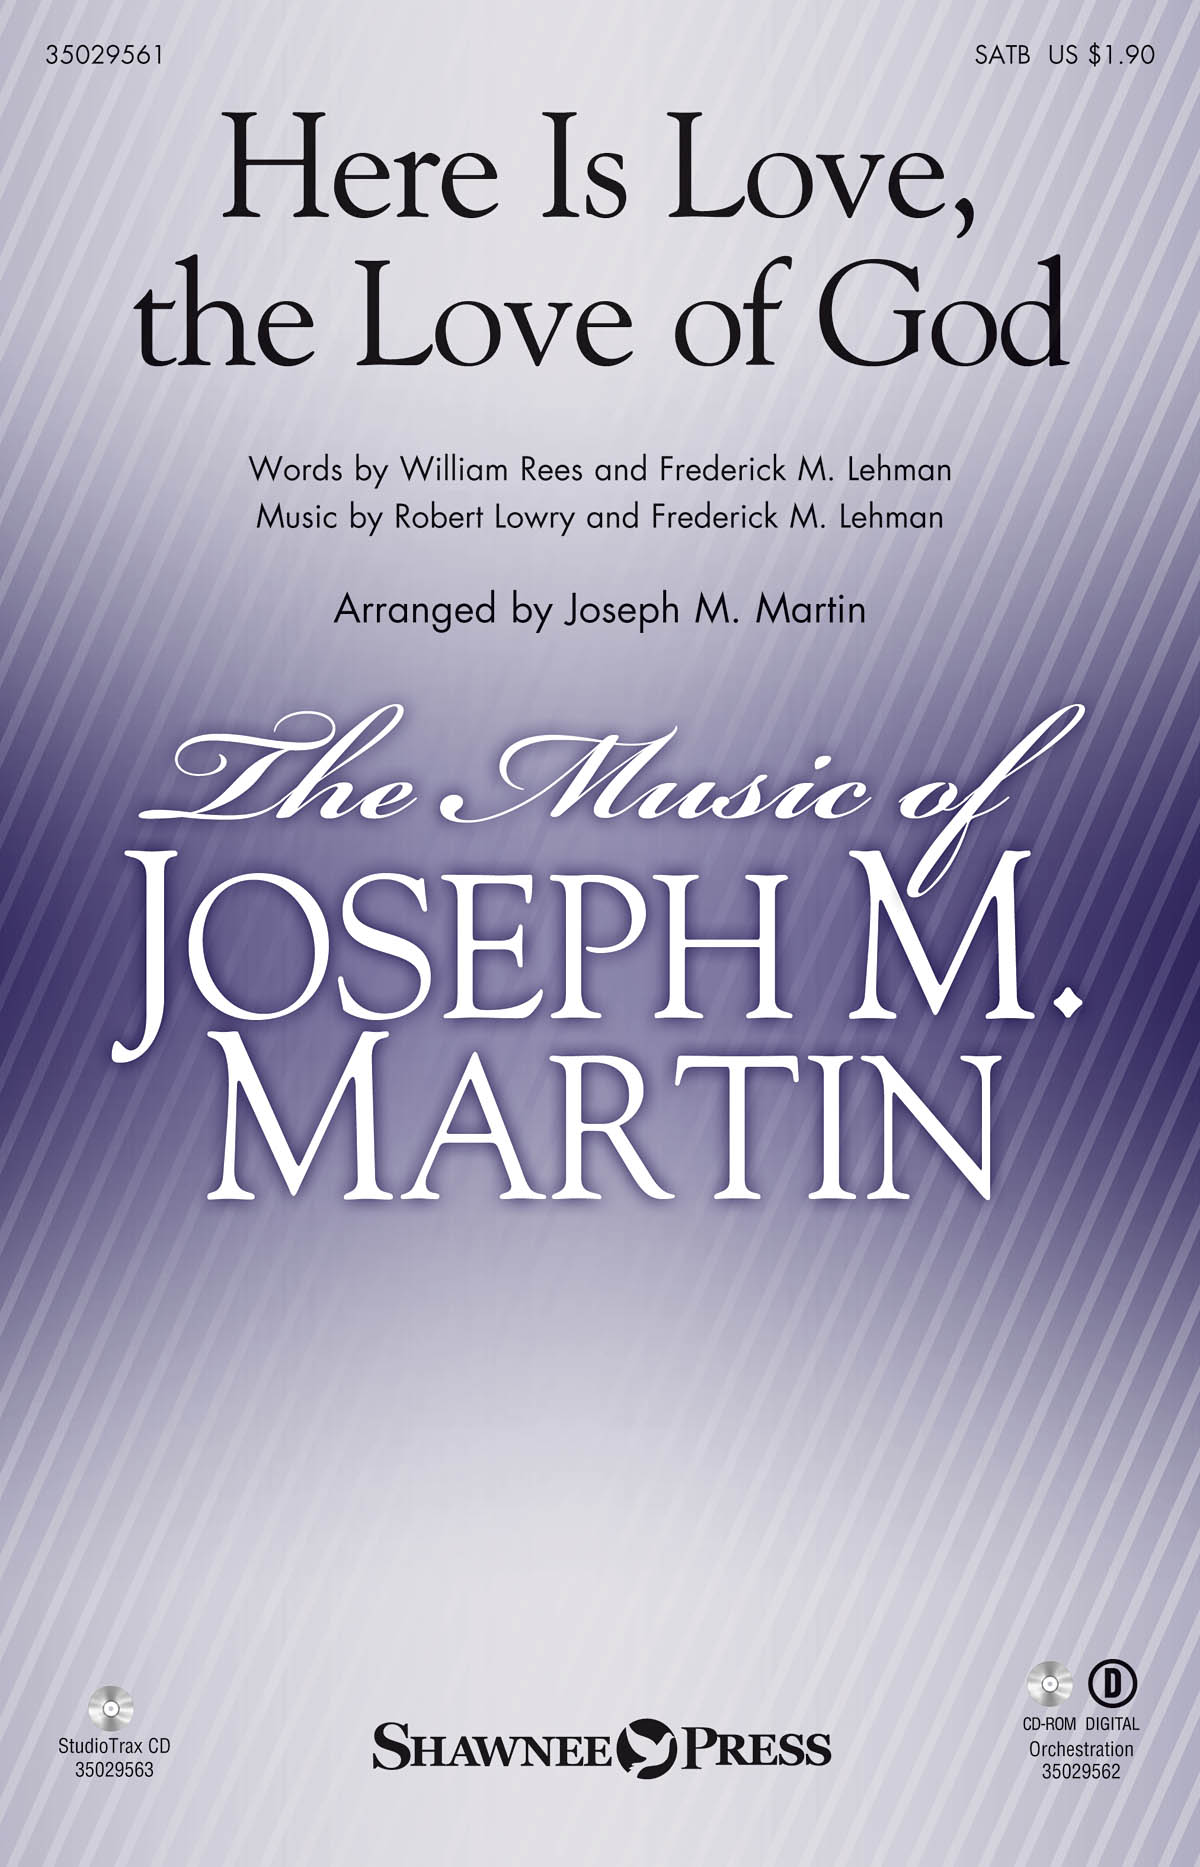 Frederick M. Lehman Robert Lowry: Here Is Love  the Love of God: SATB: Vocal